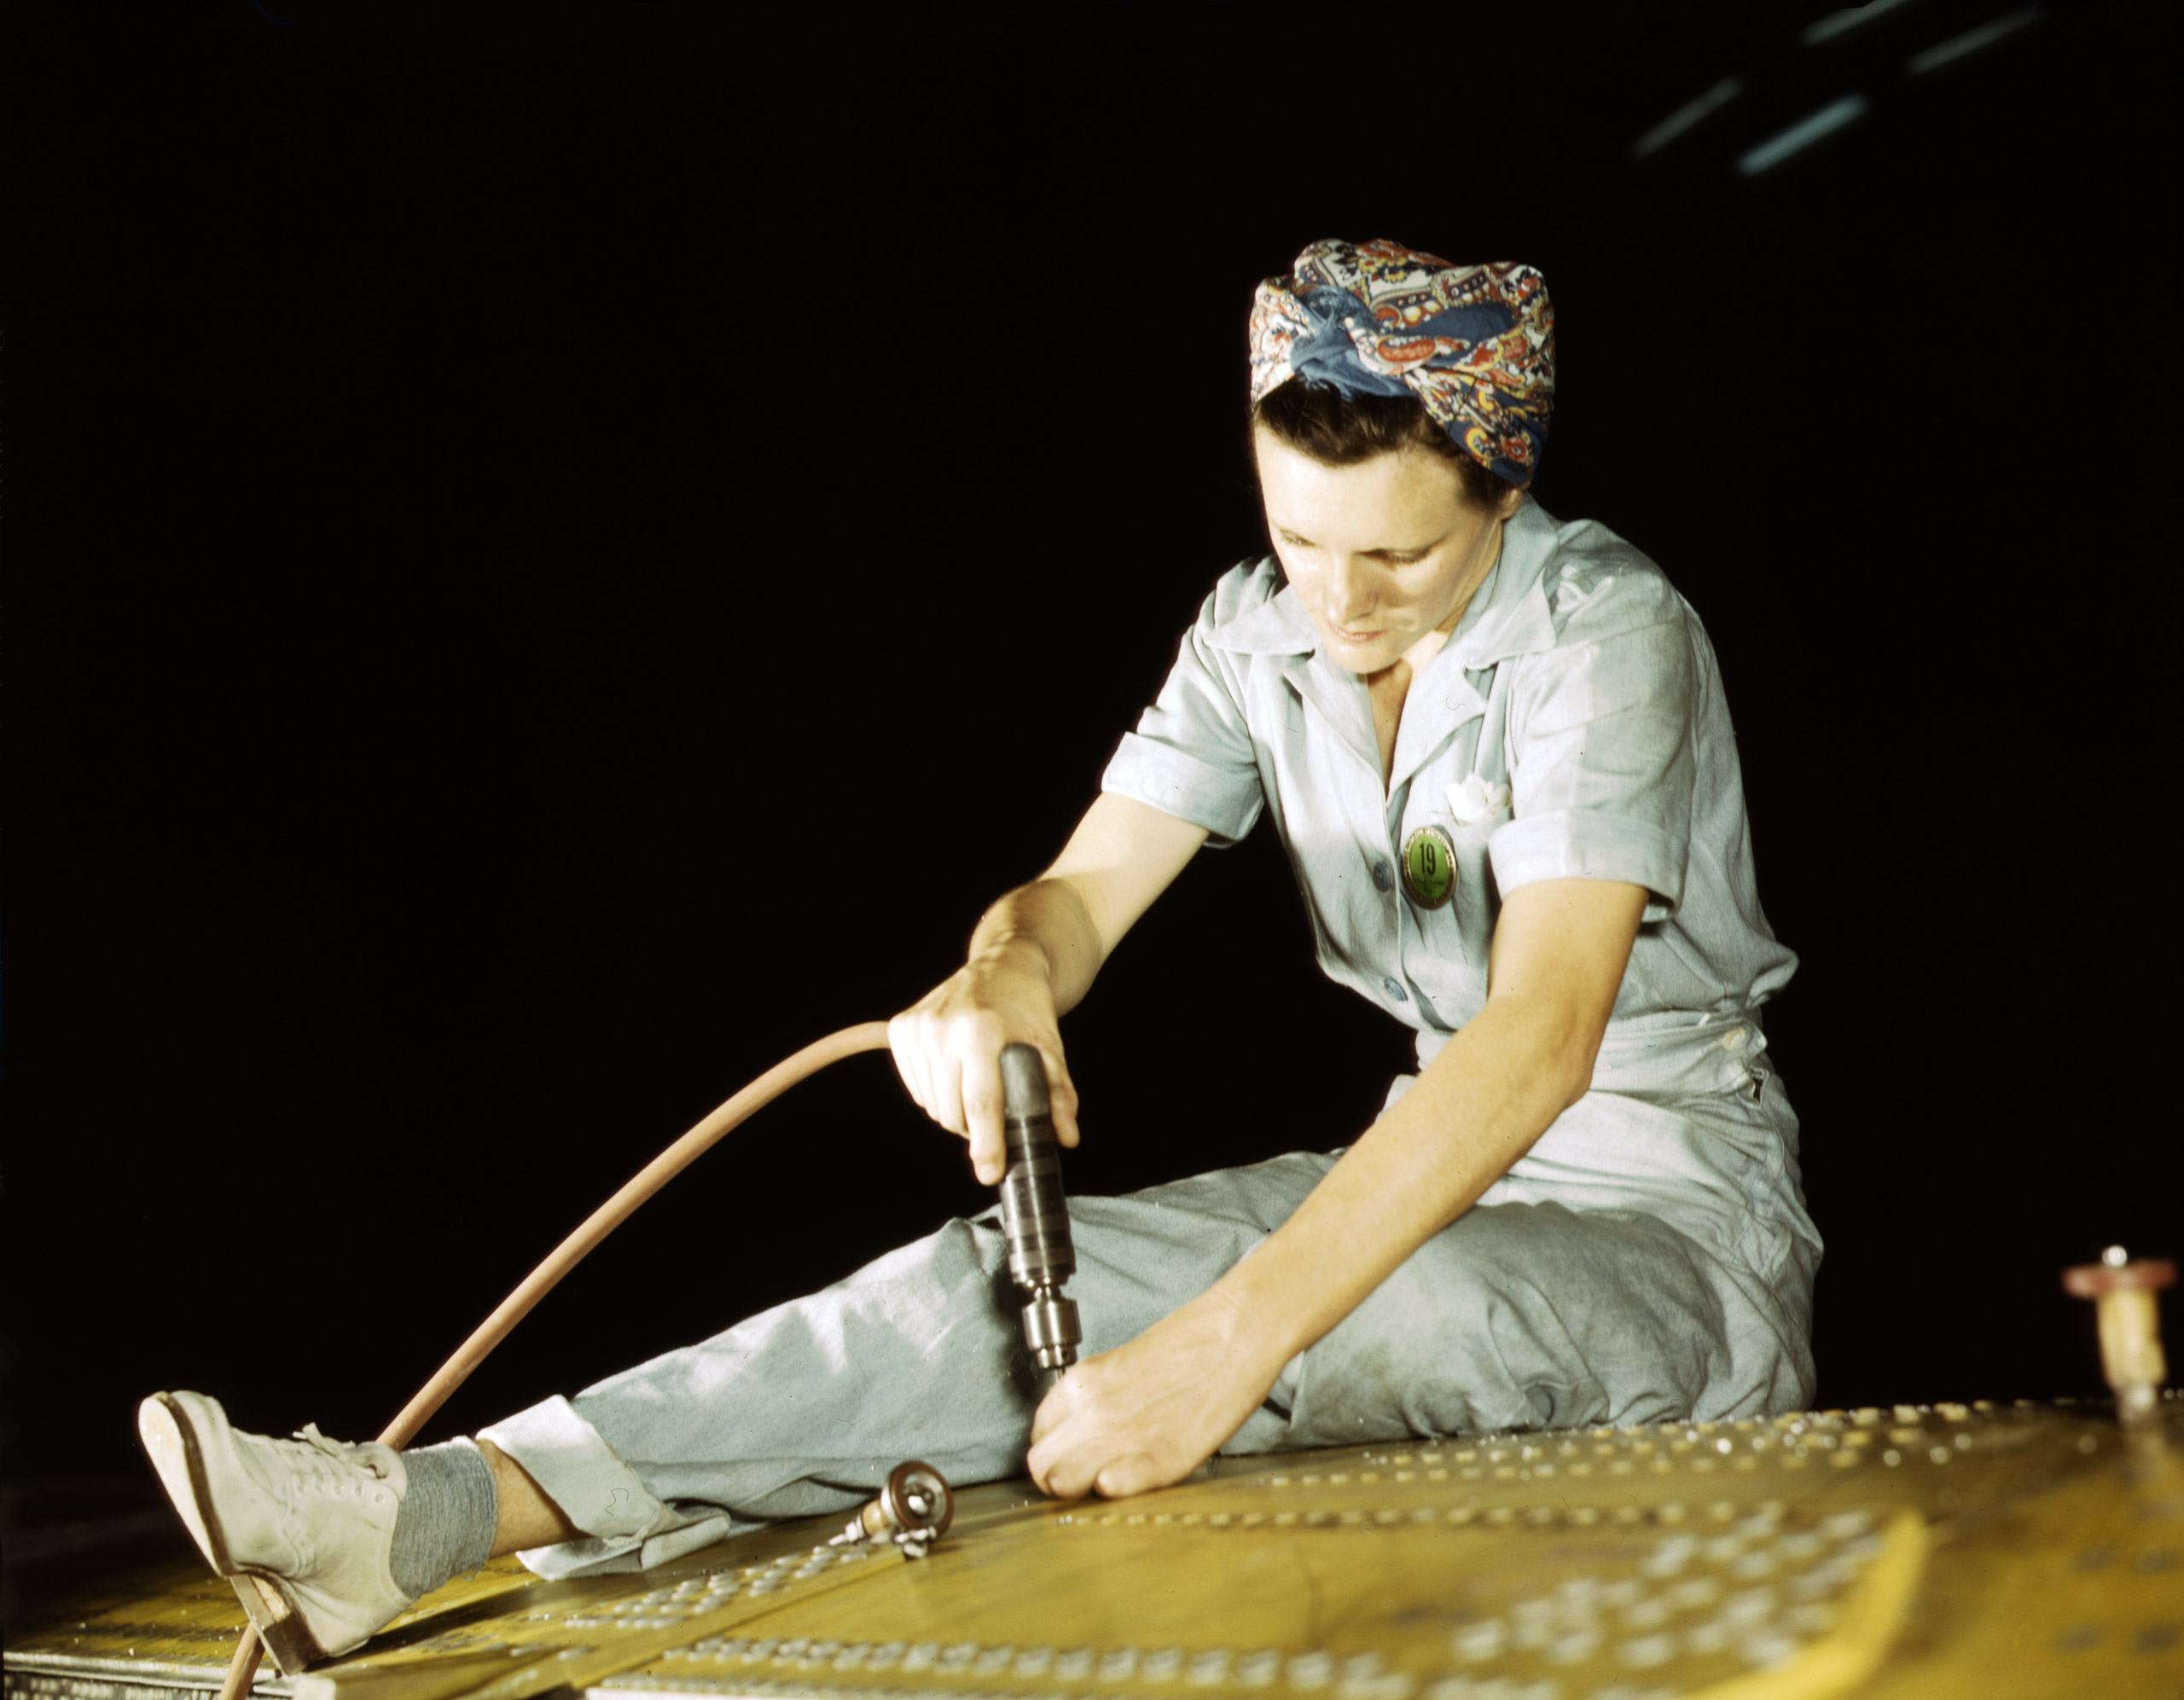 Drilling on a Liberator Bomber, Consolidated Aircraft Corp., Fort Worth, Tex., October 1942. Photographed by Howard R. Hollem for the Farm Security Administration.